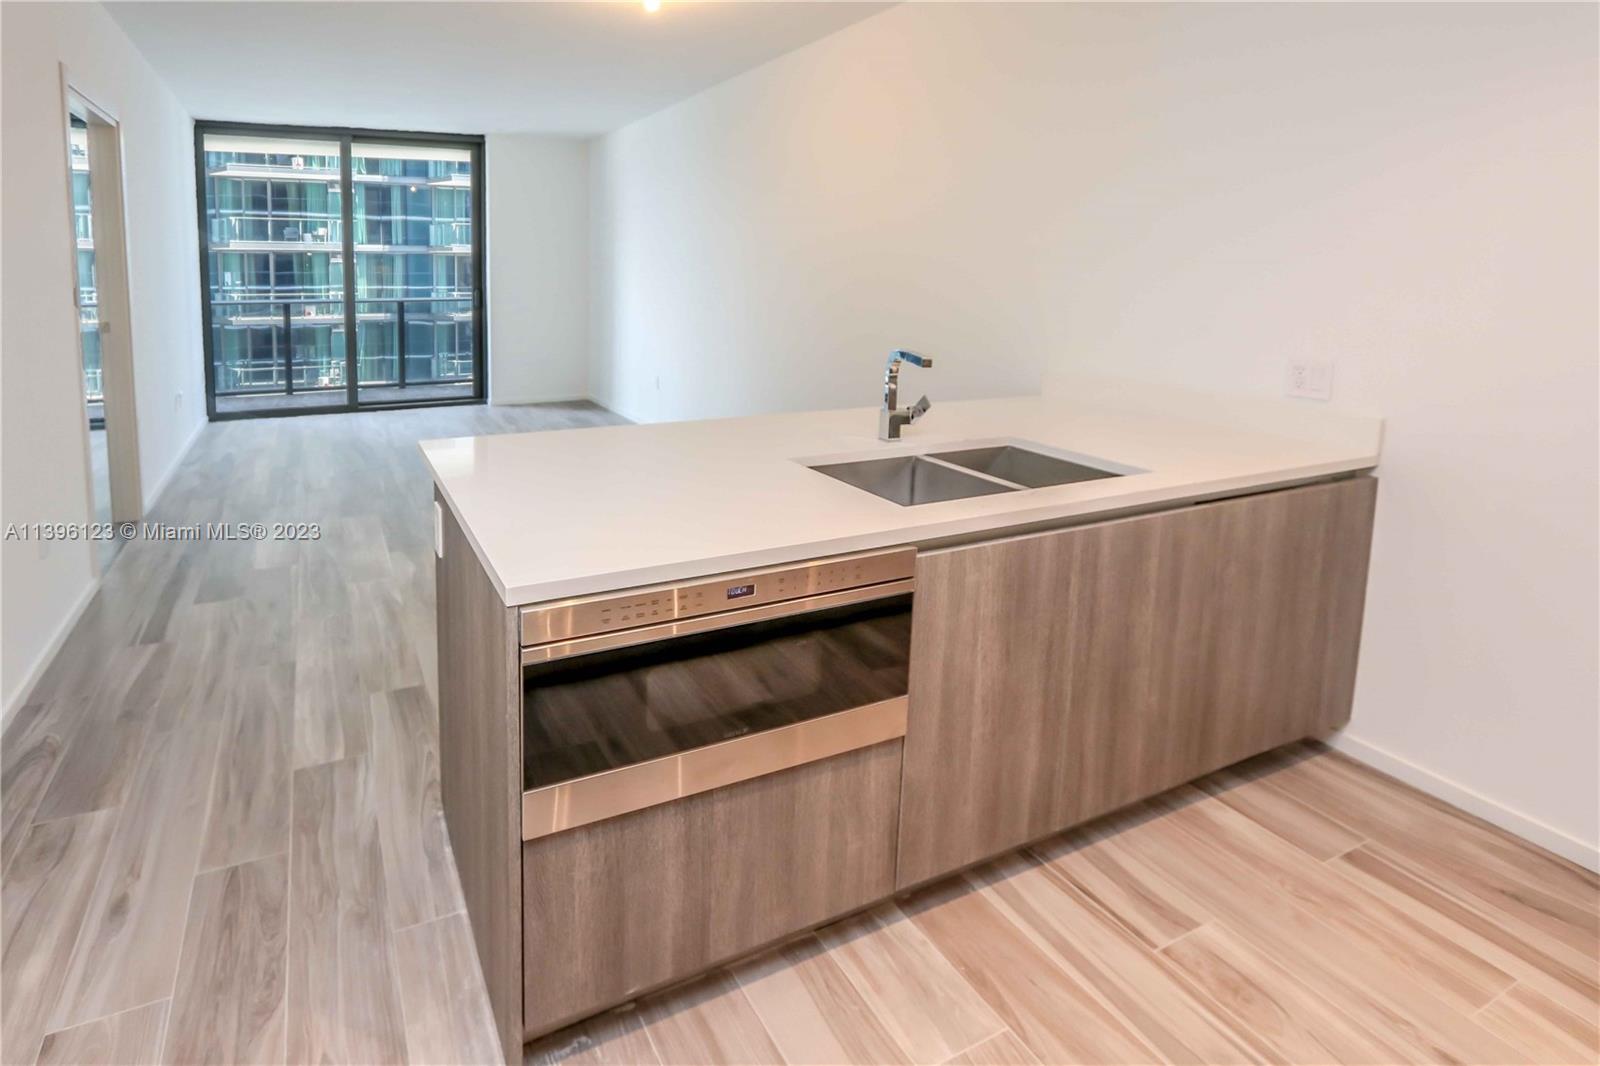 Welcome to your new home in the SLS Lux in the heart of Brickell. This one bedroom plus den offer the ultimate in luxury living. From the moment you step inside your foyer from your private elevator, you'll be greeted by views of the city. The unit boasts floor-to-ceiling windows, allowing plenty of natural light to flood the space. The modern and spacious living area seamlessly flows into the open kitchen, complete with top-of-the-line appliances. The bedroom features a spacious layout, walk-in closet, and a ensuite bathroom. The den offer a flexible space that can be used as an office or guest room. The SLS Lux offer an array of world-class amenities, including a fitness center, spa, swimming pool, and rooftop terrace with stunning city views. Located in the heart of Brickell.